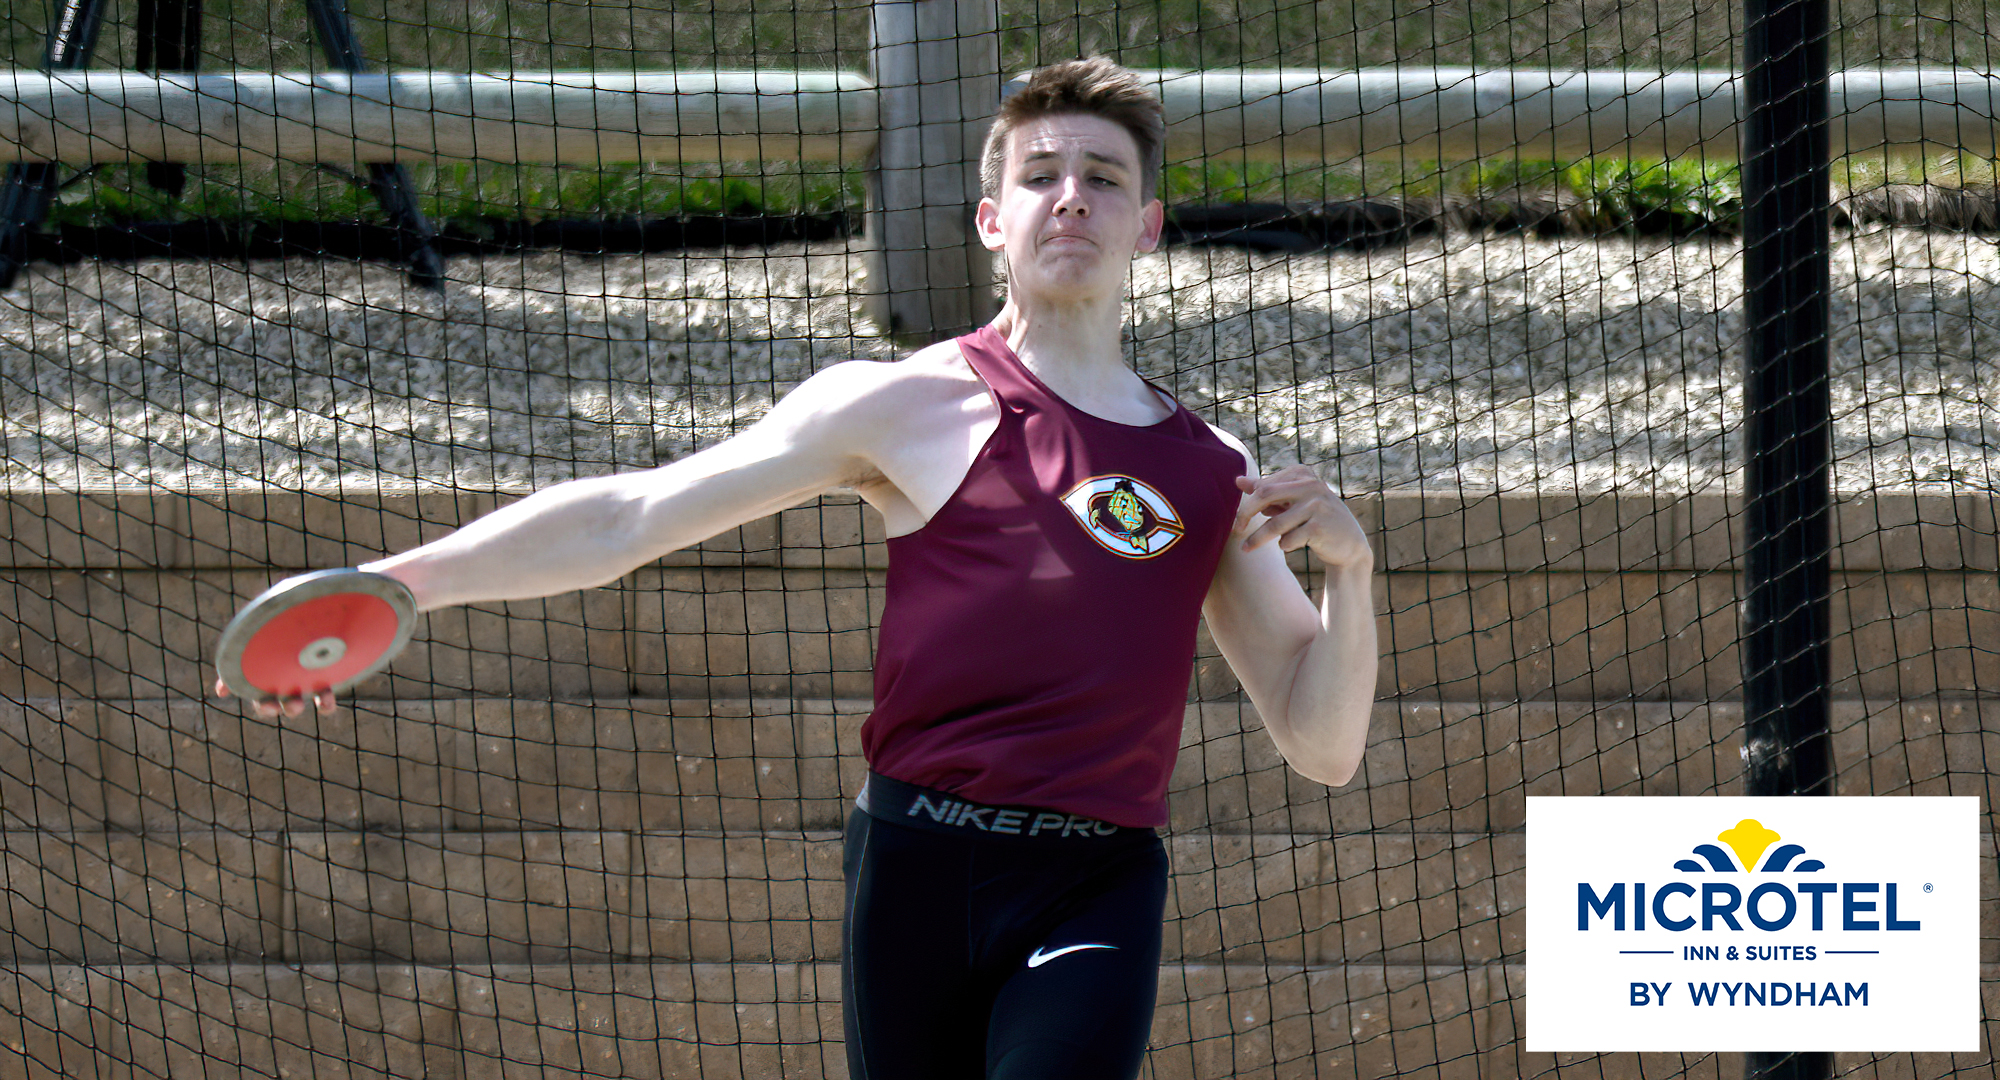 Sophomore Wade Rhonemus gets ready to launch the discus in the MIAC decathlon. he went on to finish third in his very first conference decathlon. (Photo courtesy of David Pape, Carleton SID)